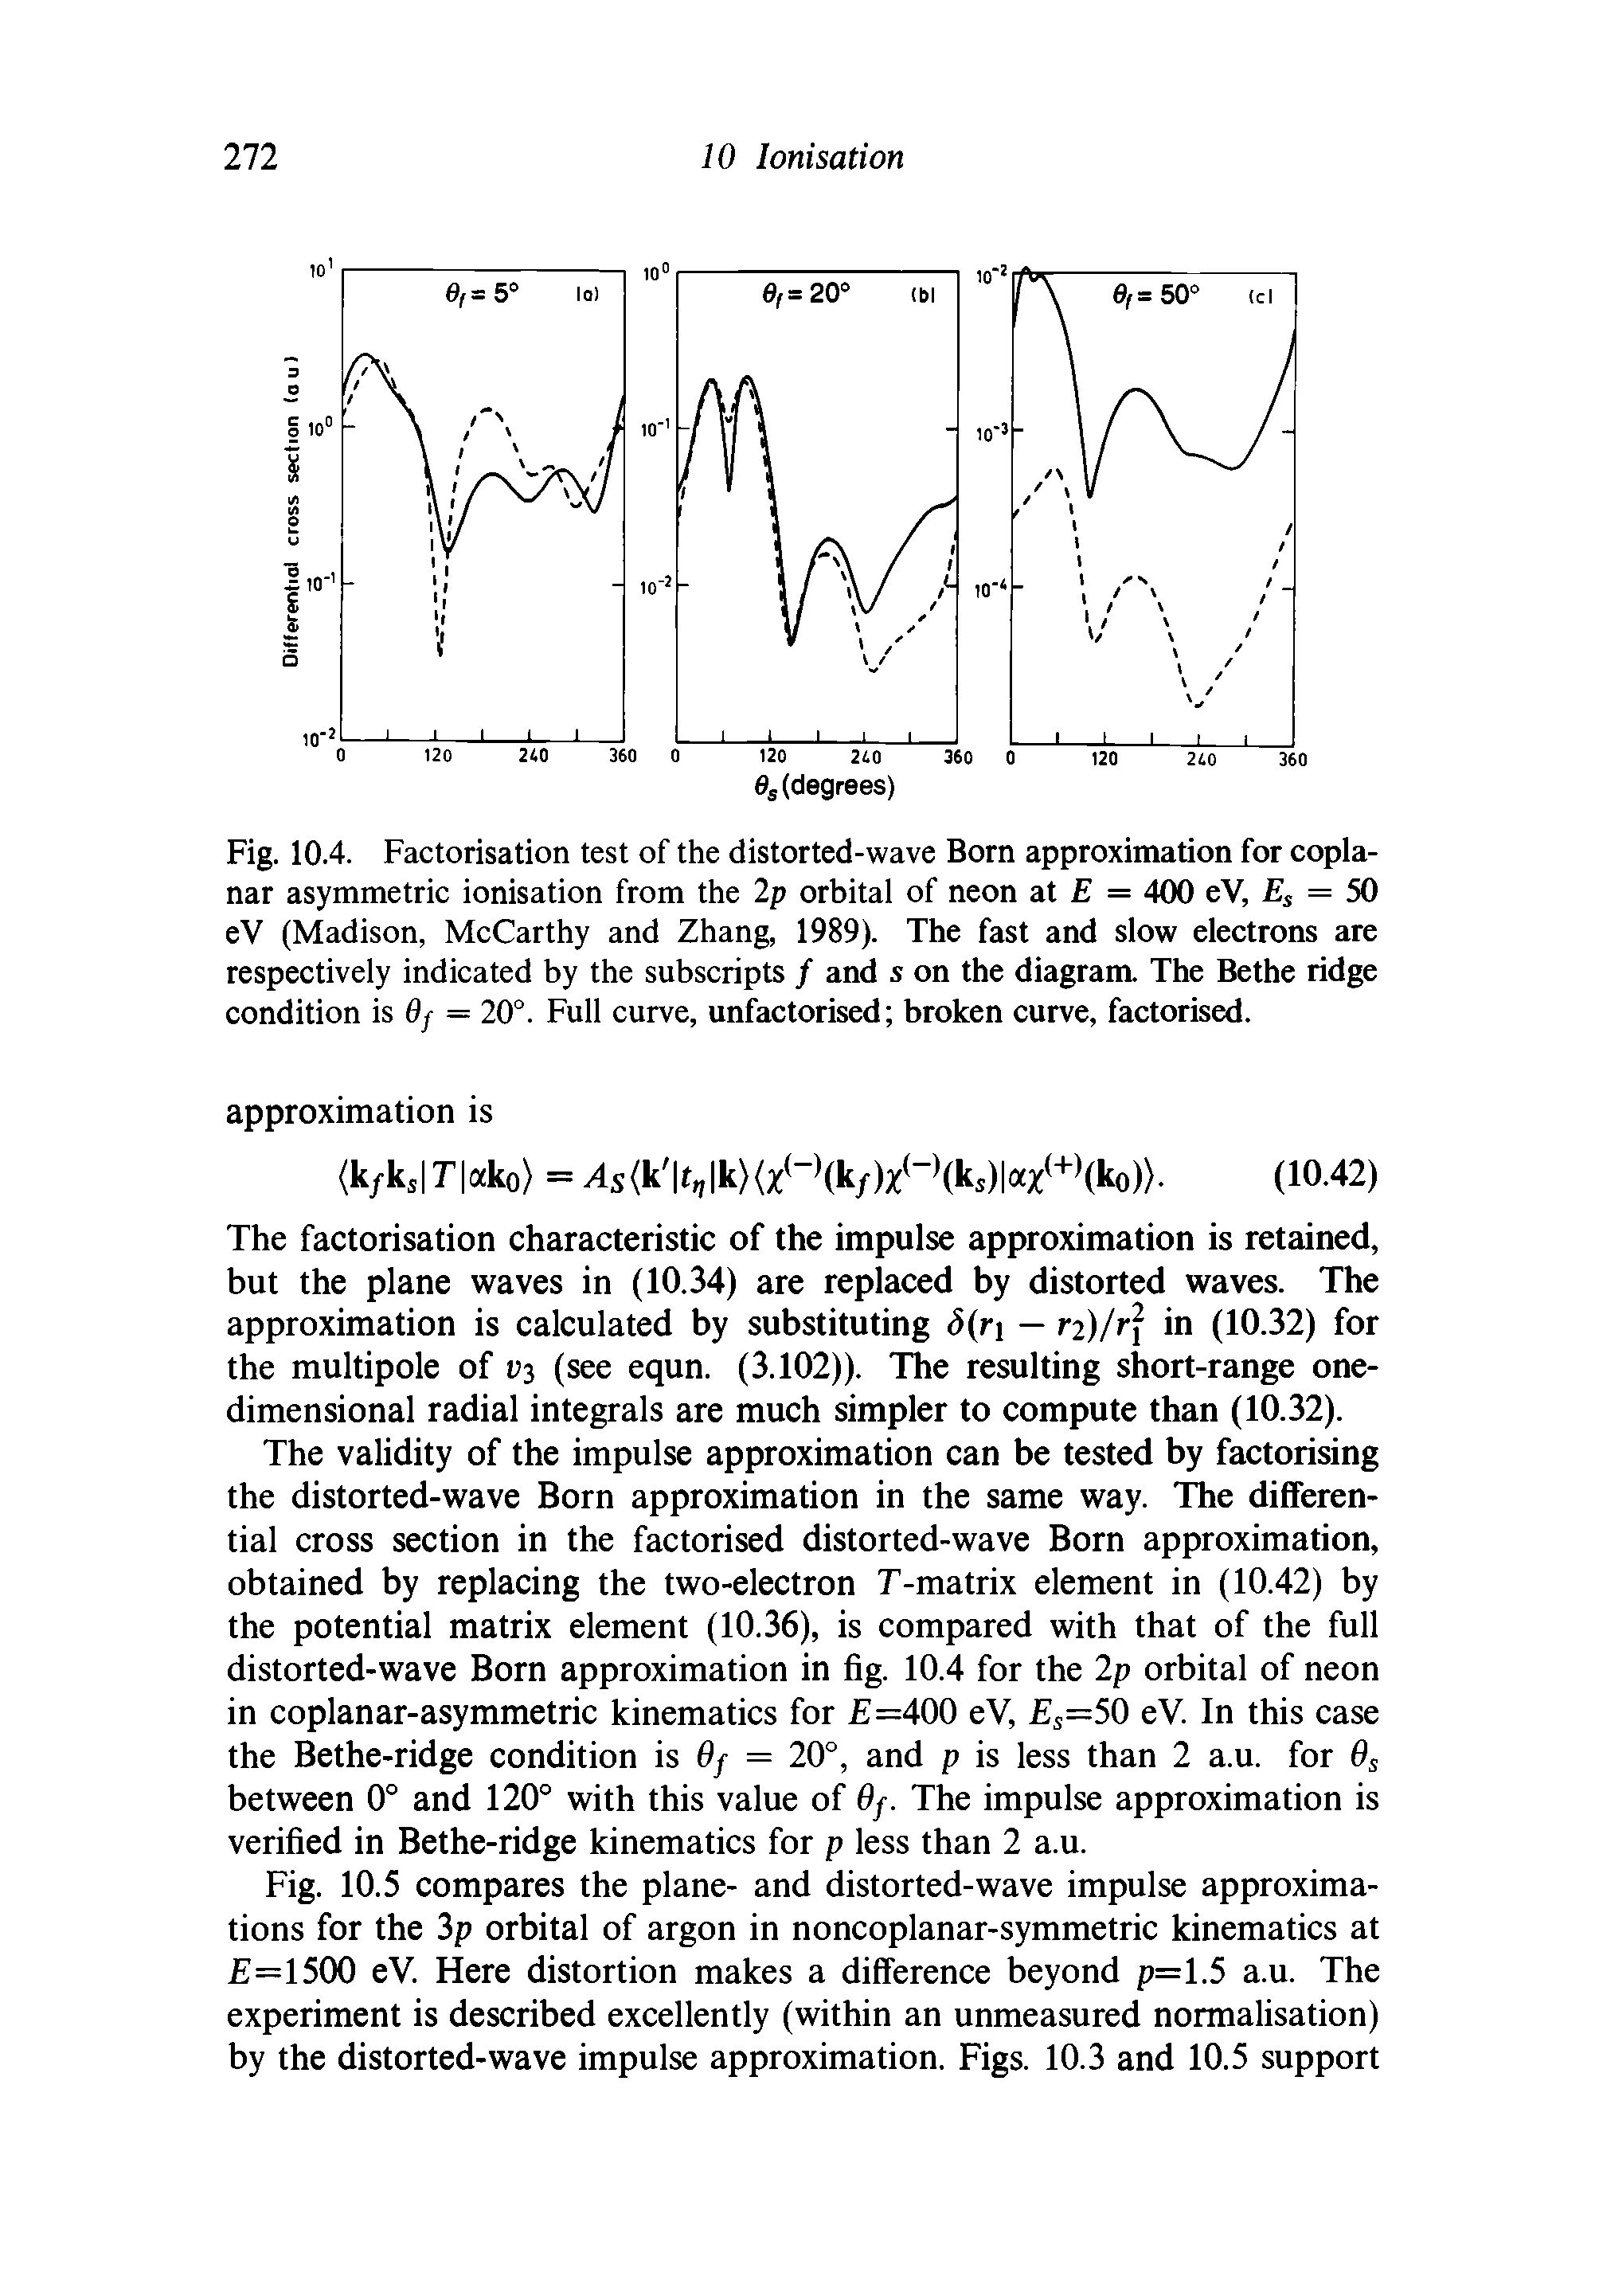 Fig. 10.4. Factorisation test of the distorted-wave Born approximation for copla-nar asymmetric ionisation from the 2p orbital of neon at = 400 eV, j = 50 eV (Madison, McCarthy and Zhang, 1989). The fast and slow electrons are respectively indicated by the subscripts / and s on the diagram The Bethe ridge condition is df = 20°. Full curve, unfactorised broken curve, factorised.